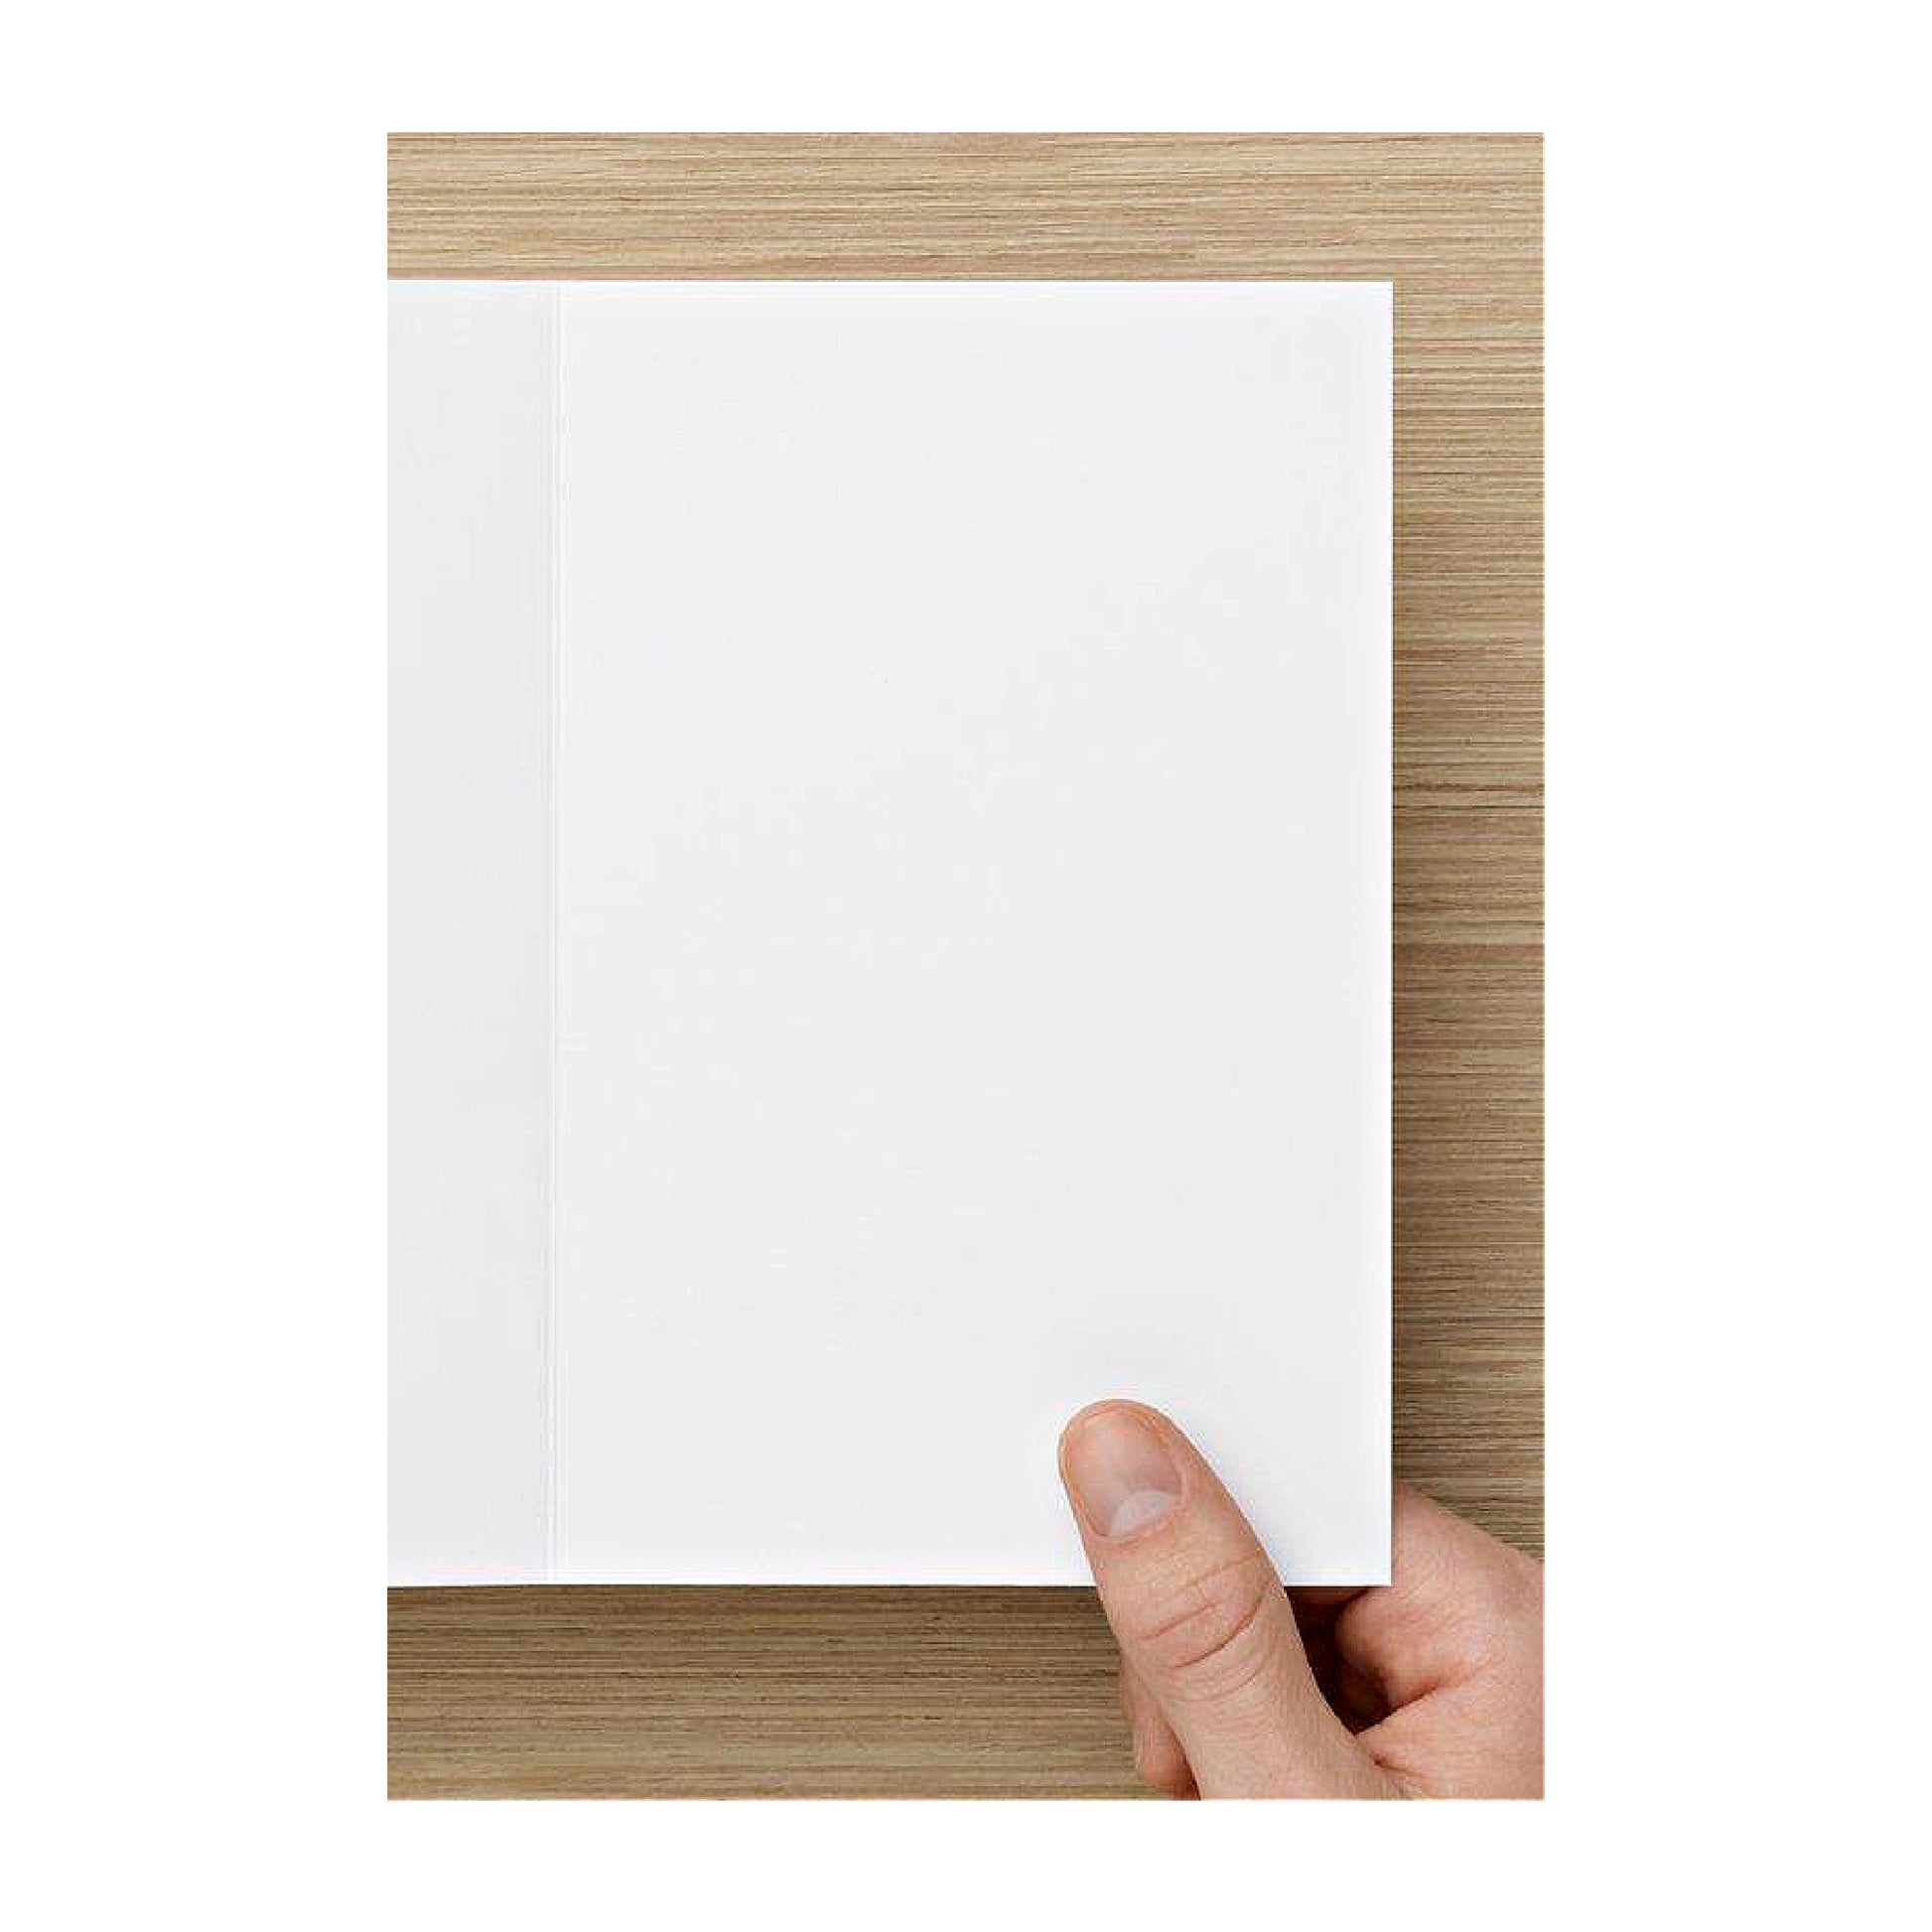 Photo of the blank inside note card